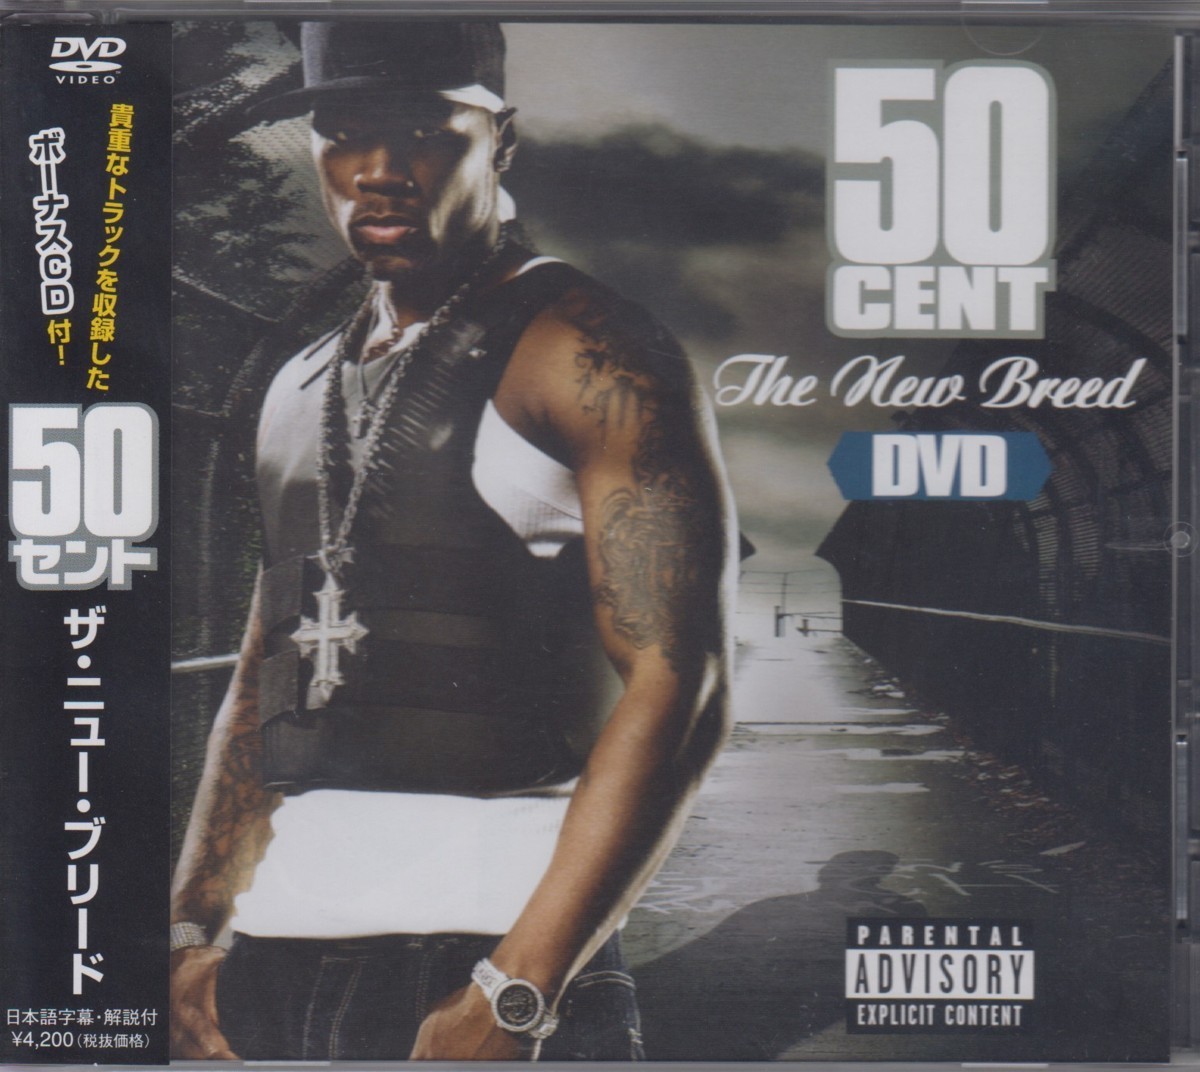 50 Cent (フィフティセント) / New Breed 【DVD+CD】 ★中古盤  /211205の画像1